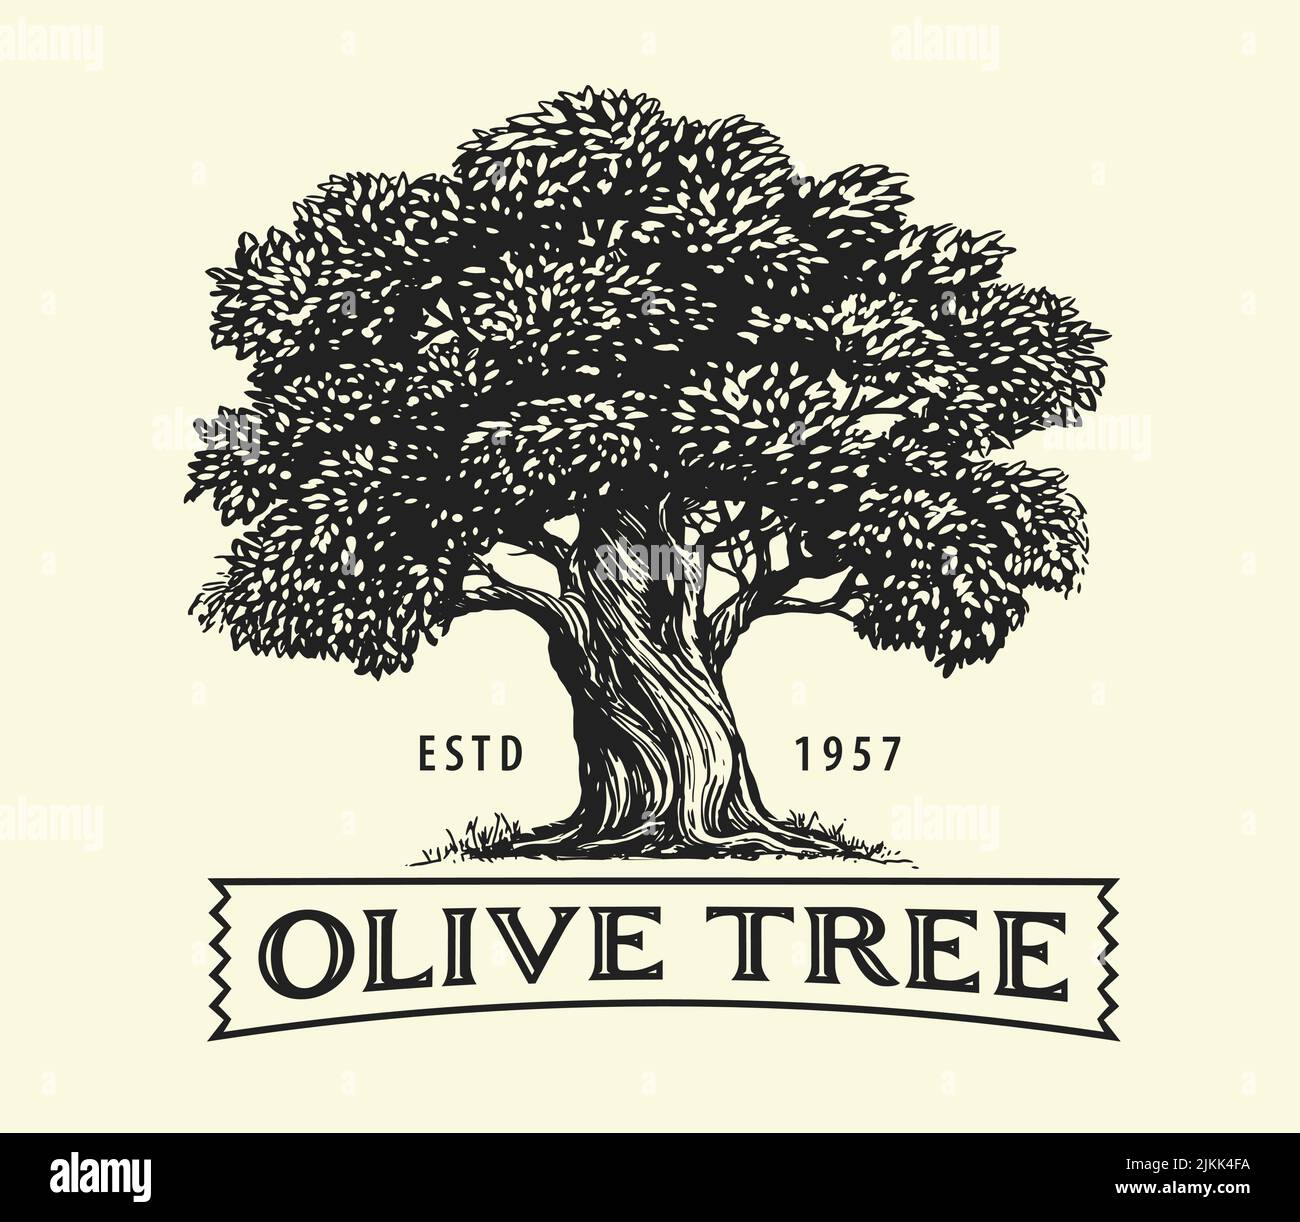 Olive tree with olives on branches. Olive oil emblem sketch. Hand drawn vector illustration in vintage engraving style Stock Vector